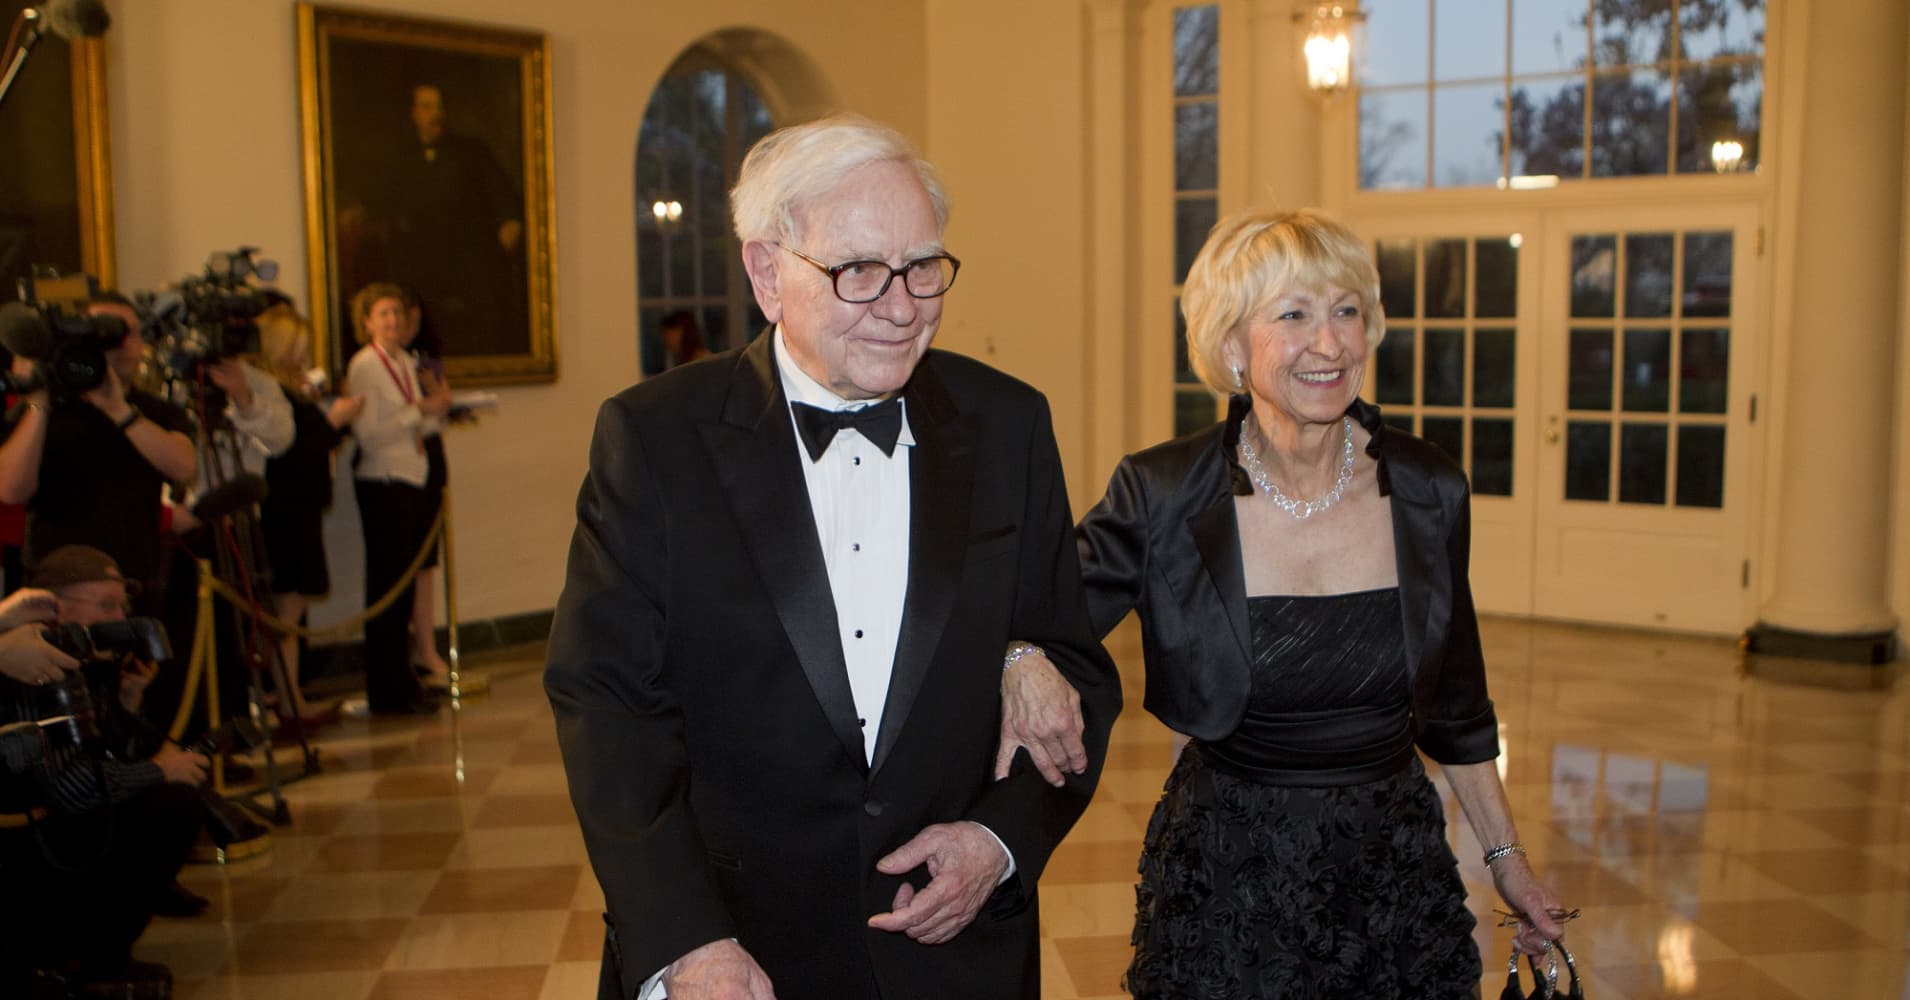 Warren Buffett and his wife Astrid Buffett arrive to a state dinner hosted by U.S. President Barack Obama and first lady Michelle Obam at the White House in Washington, D.C., U.S., on Wednesday, March 14, 2012.